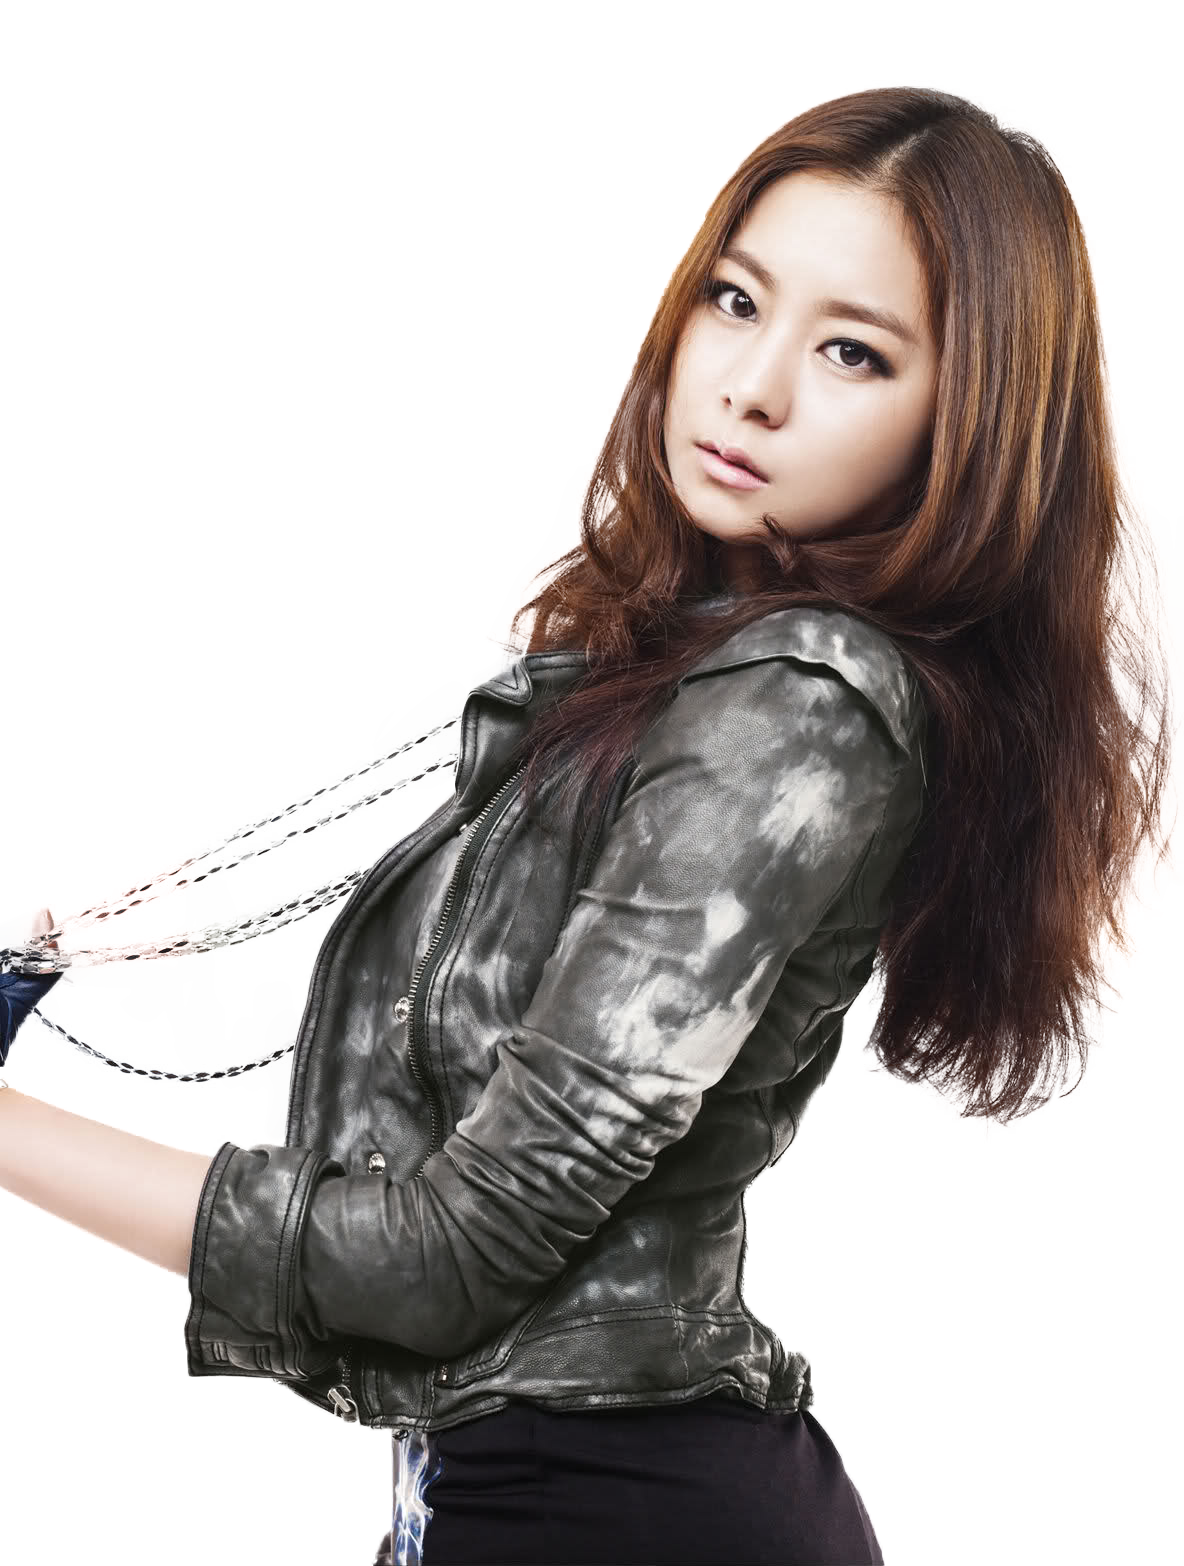 http://fc00.deviantart.net/fs70/f/2013/147/0/9/uee__after_school__png__render__by_gajmeditions-d66s2rl.png